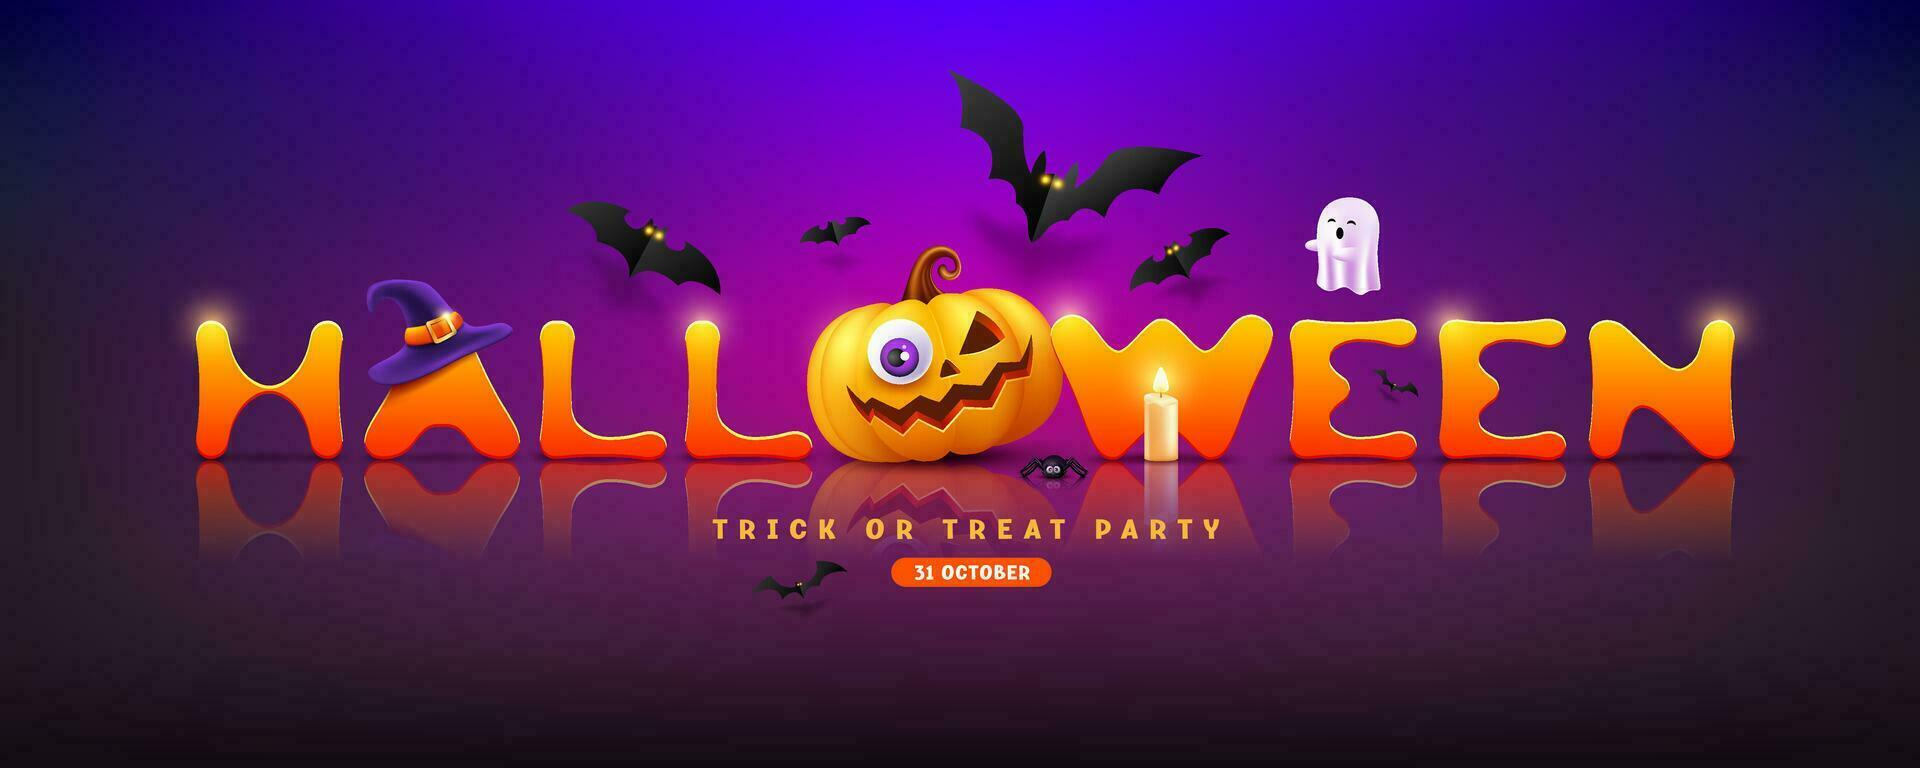 Halloween text design yellow and orange design, with yellow pumpkins, bat flying, ghost, candle, spider, banner design on purple background, Eps 10 vector illustration